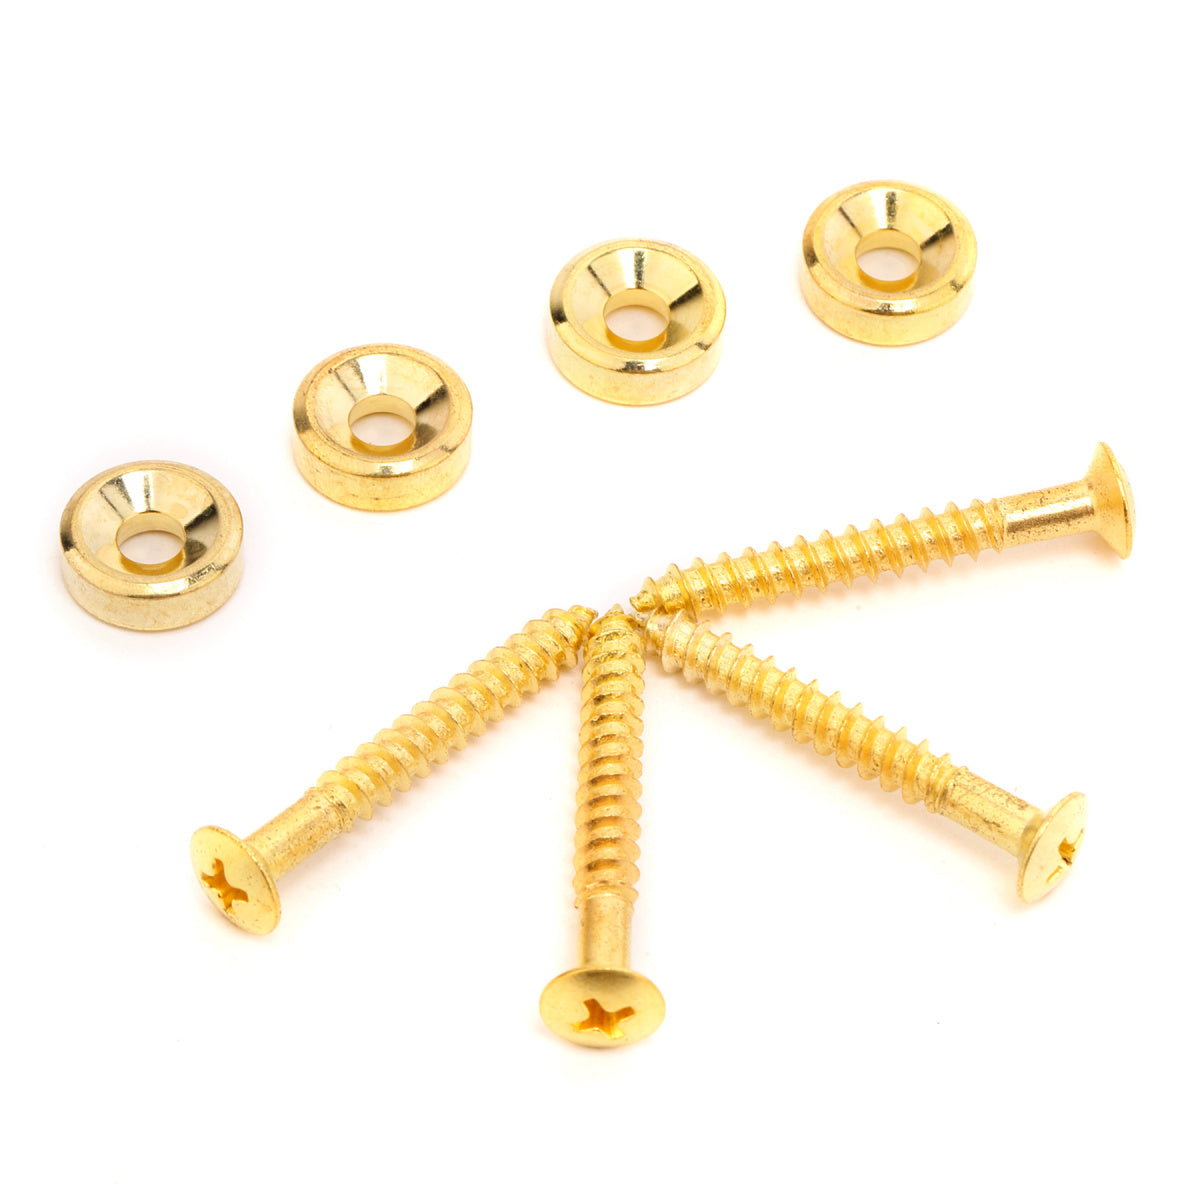 Musiclily Electric Guitar Bass Neck Joint Bushings & Bolts,Gold (4 Pieces)